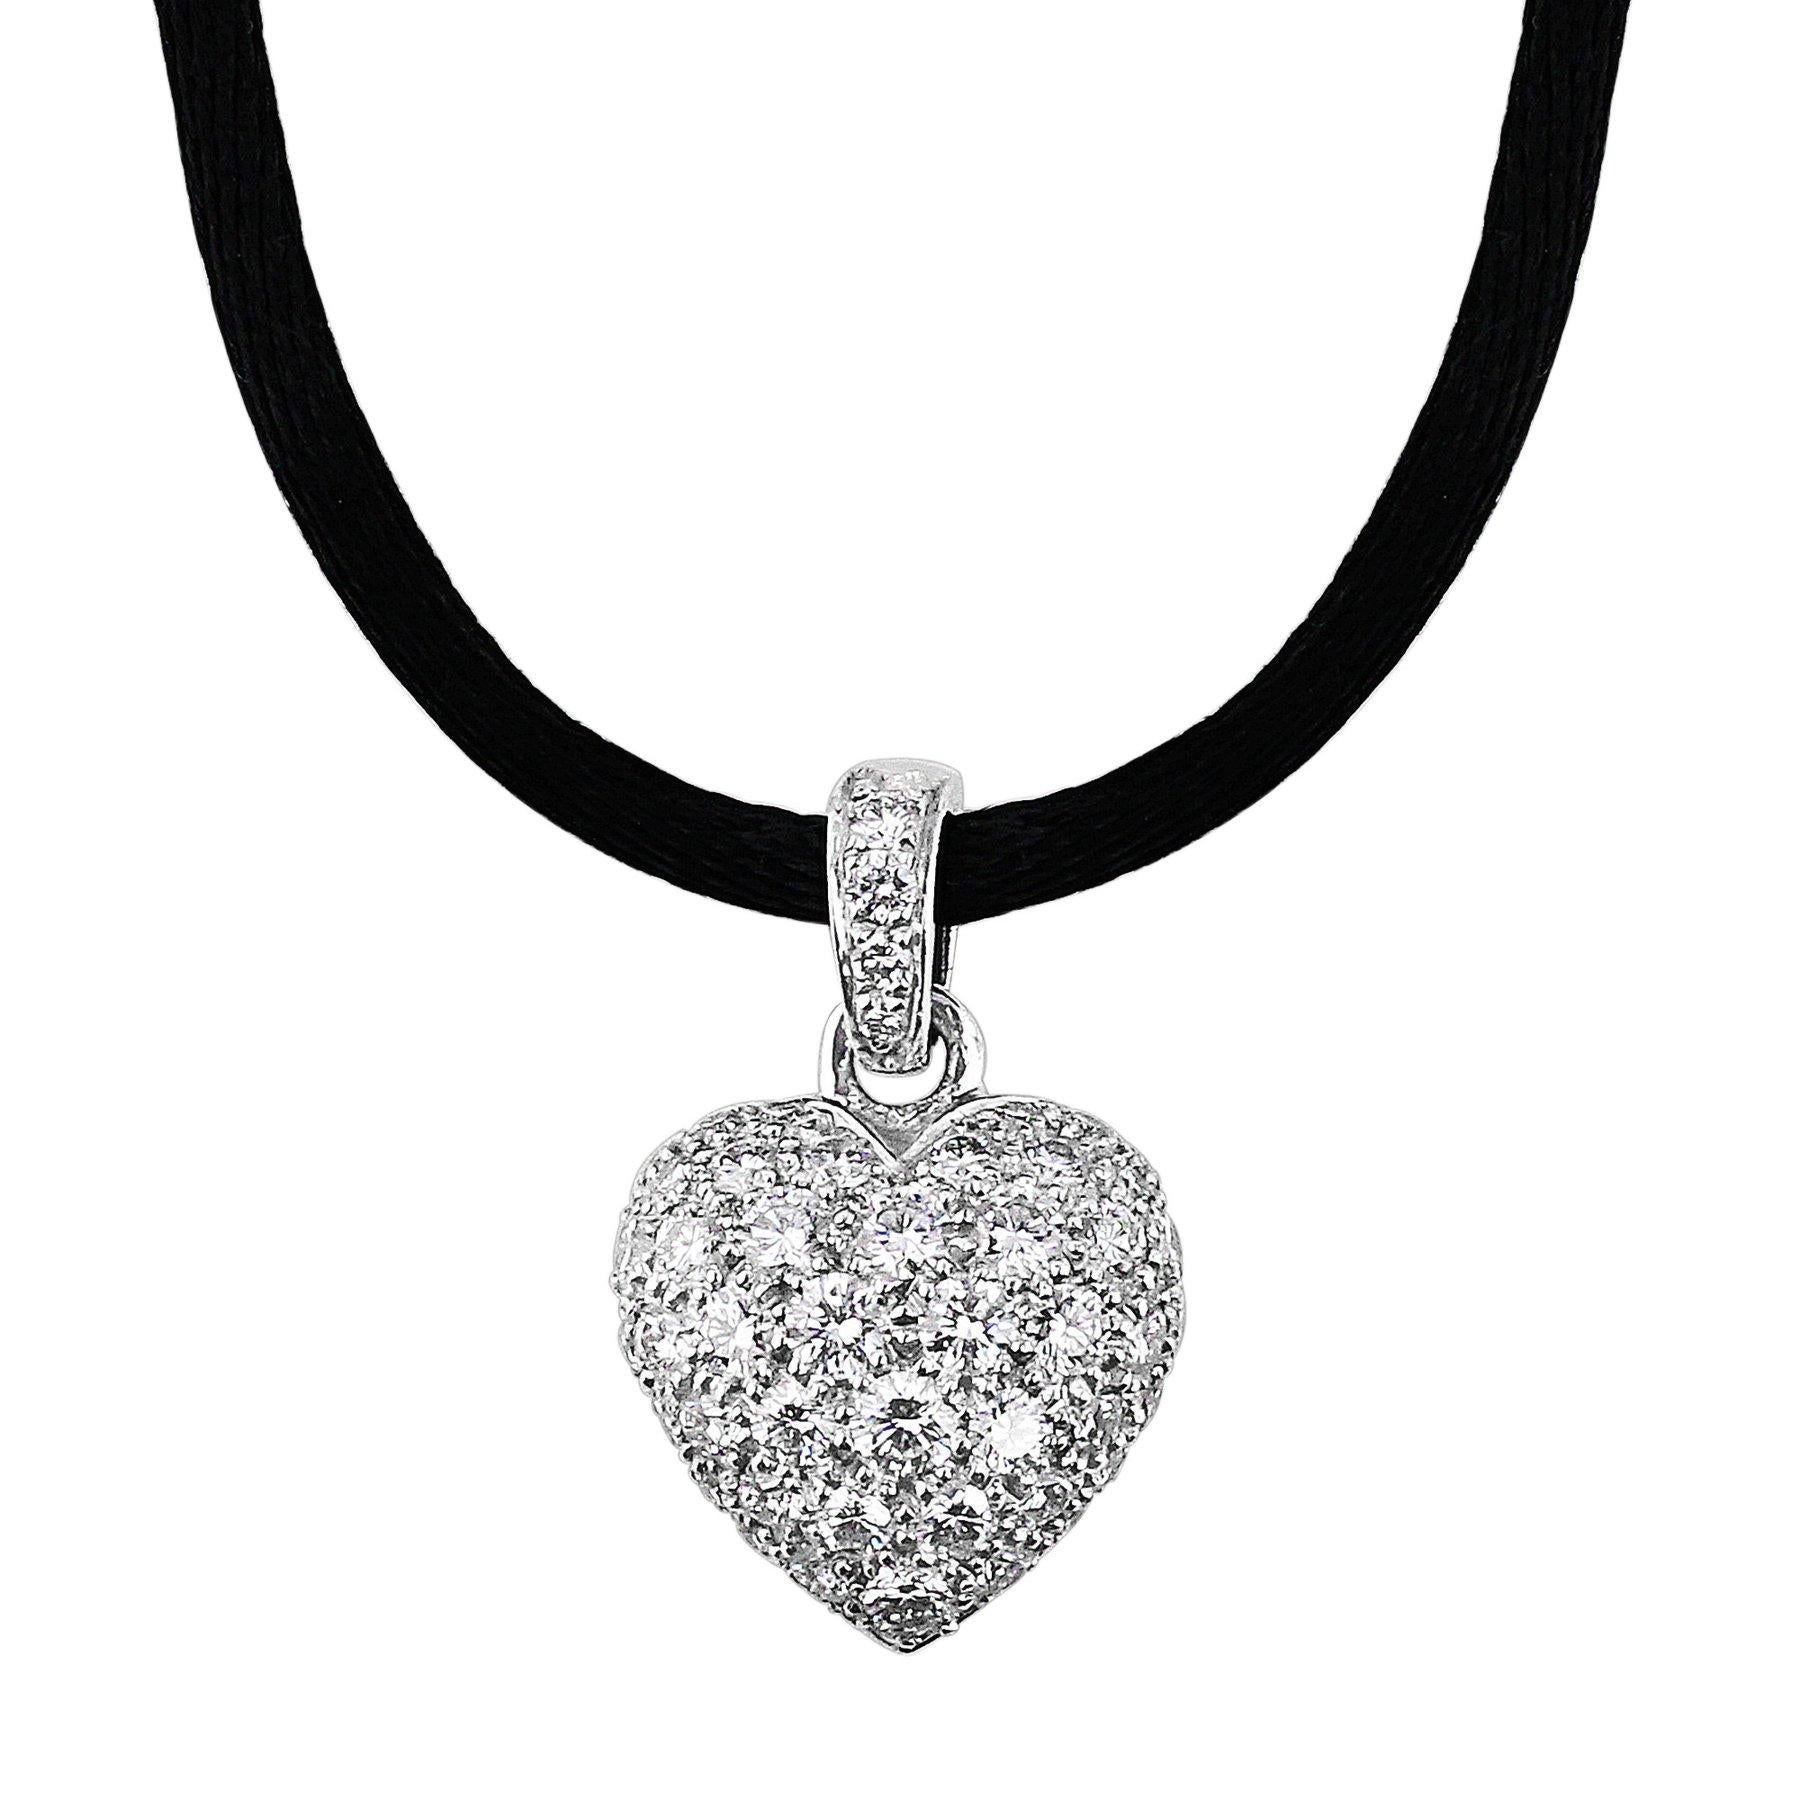 Cartier Puff Heart Diamond Necklace. 18k white gold estate Cartier puff heart pendant set with diamonds weighing approximately 1.50cttw. The pendant is set upon a black cord.